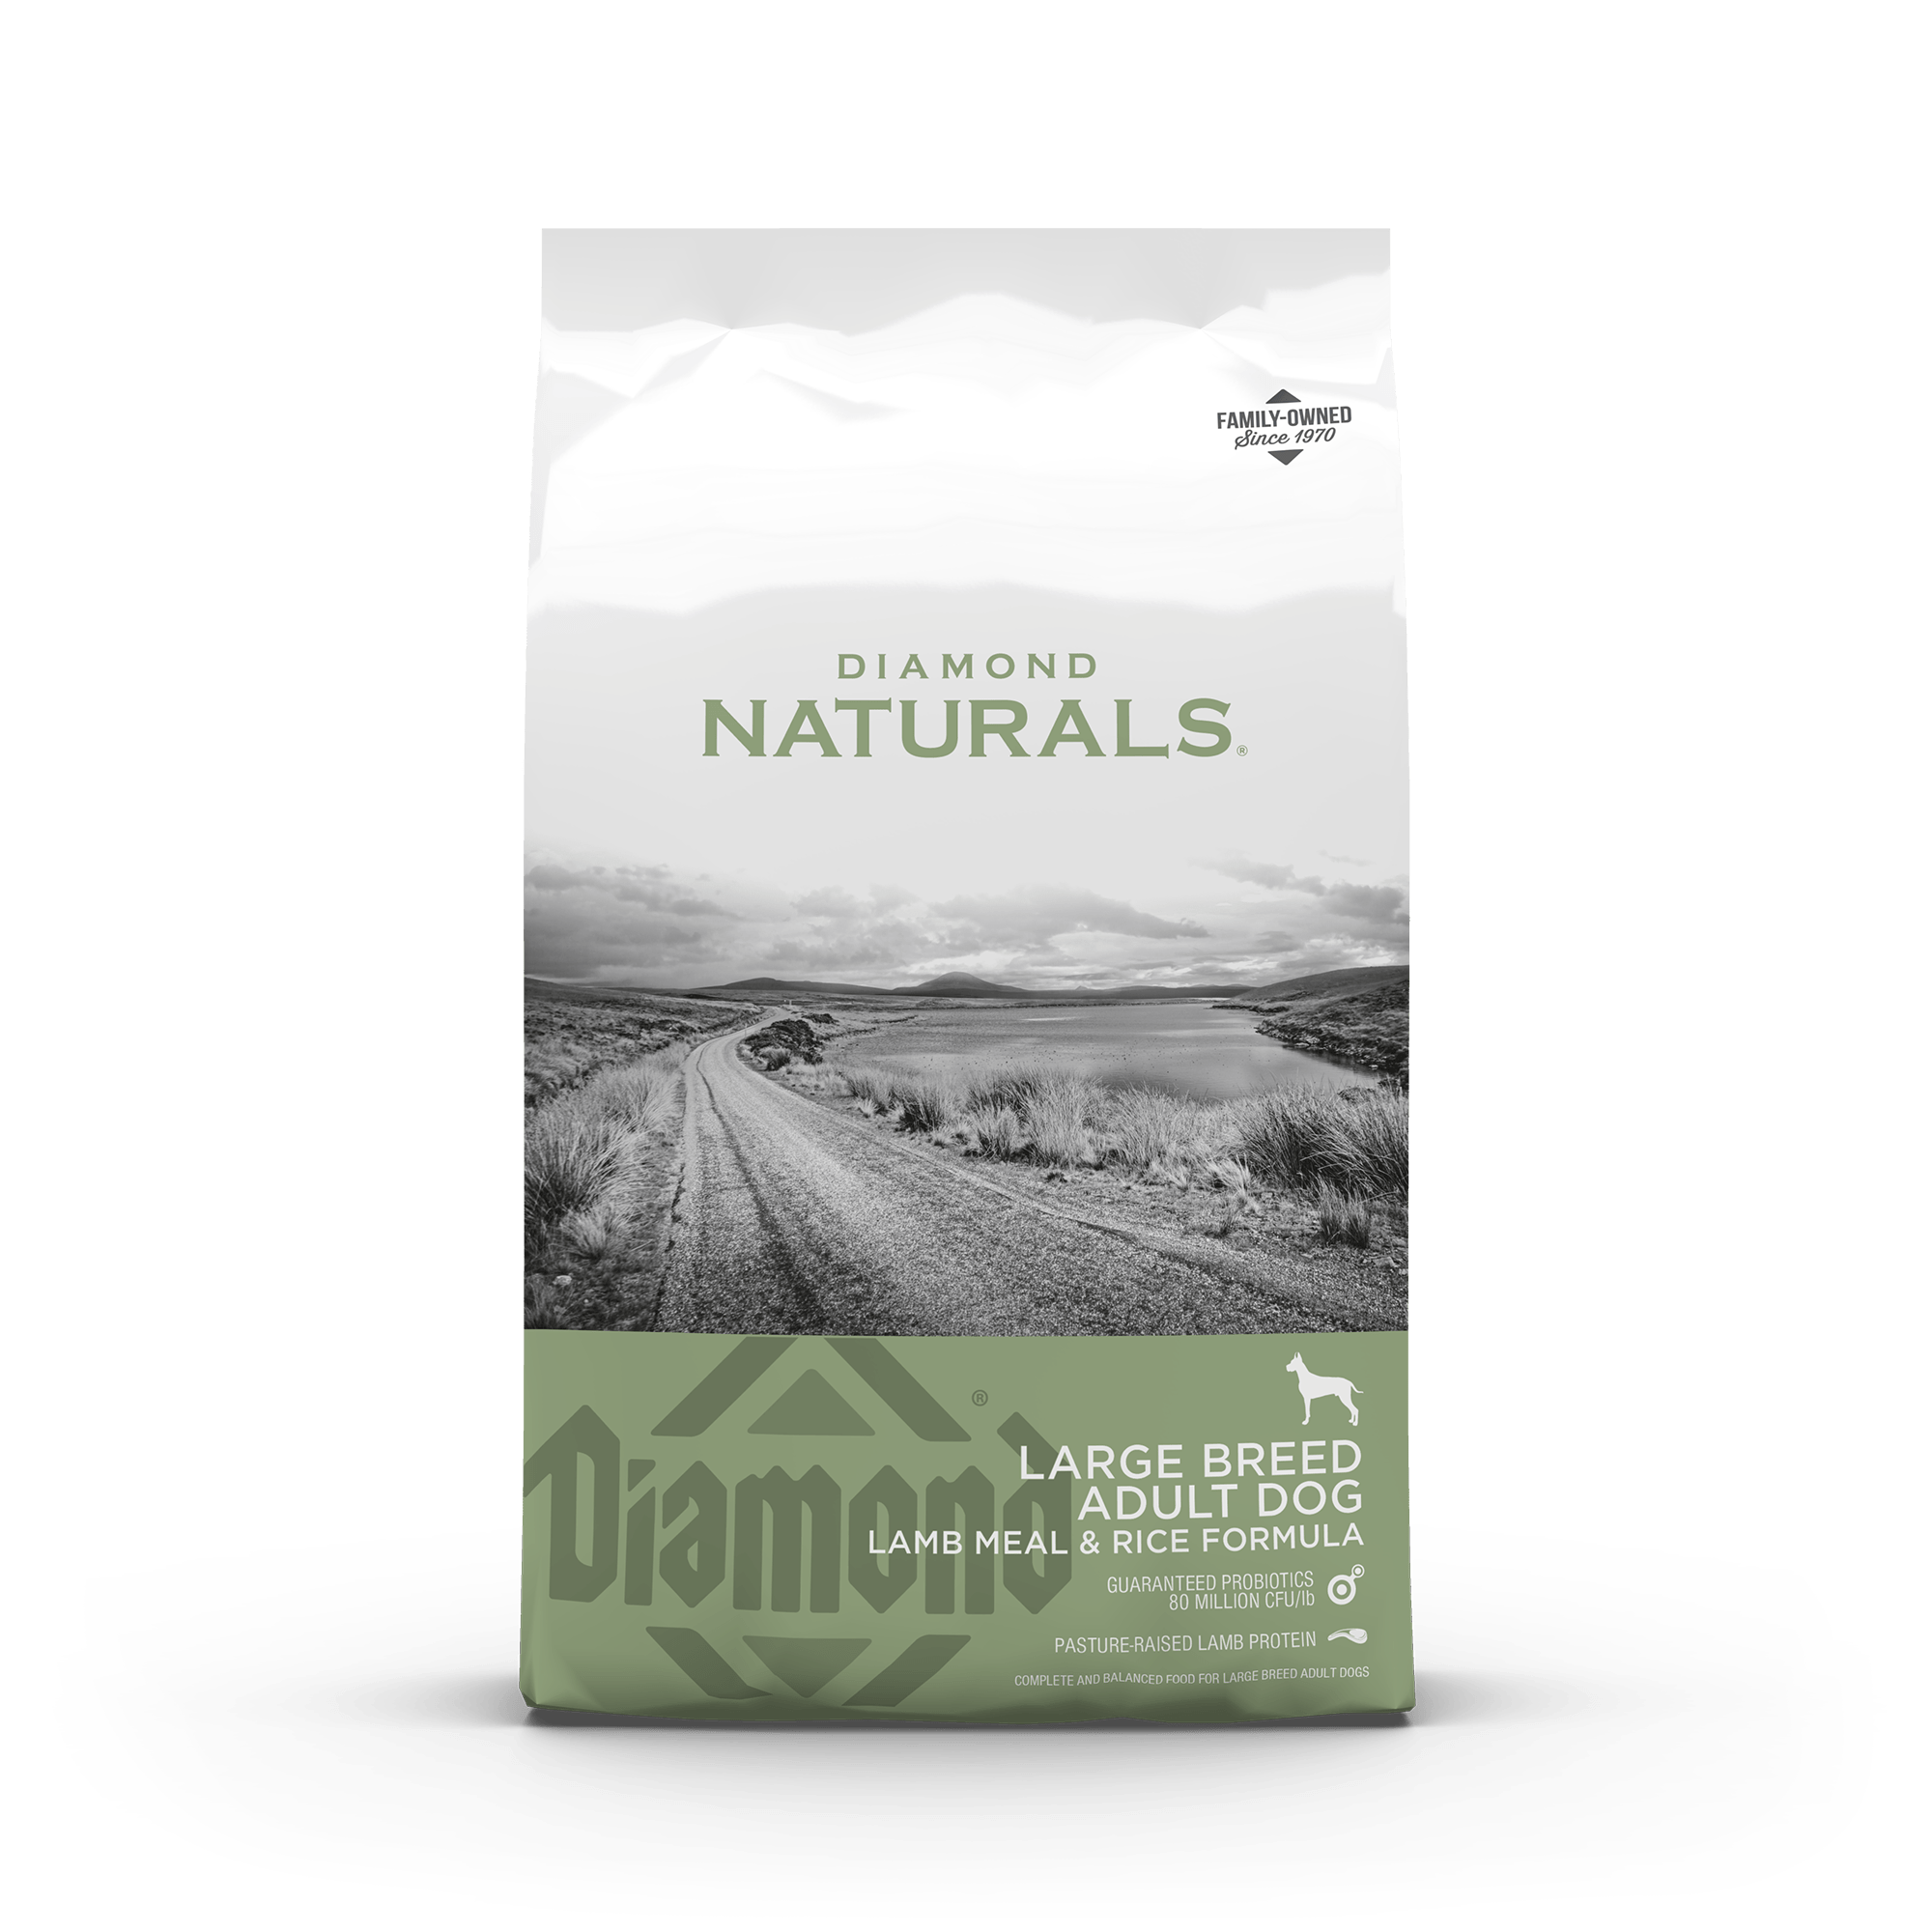 Diamond Naturals Large Breed Adult Dog Lamb Meal & Rice Formula product packaging